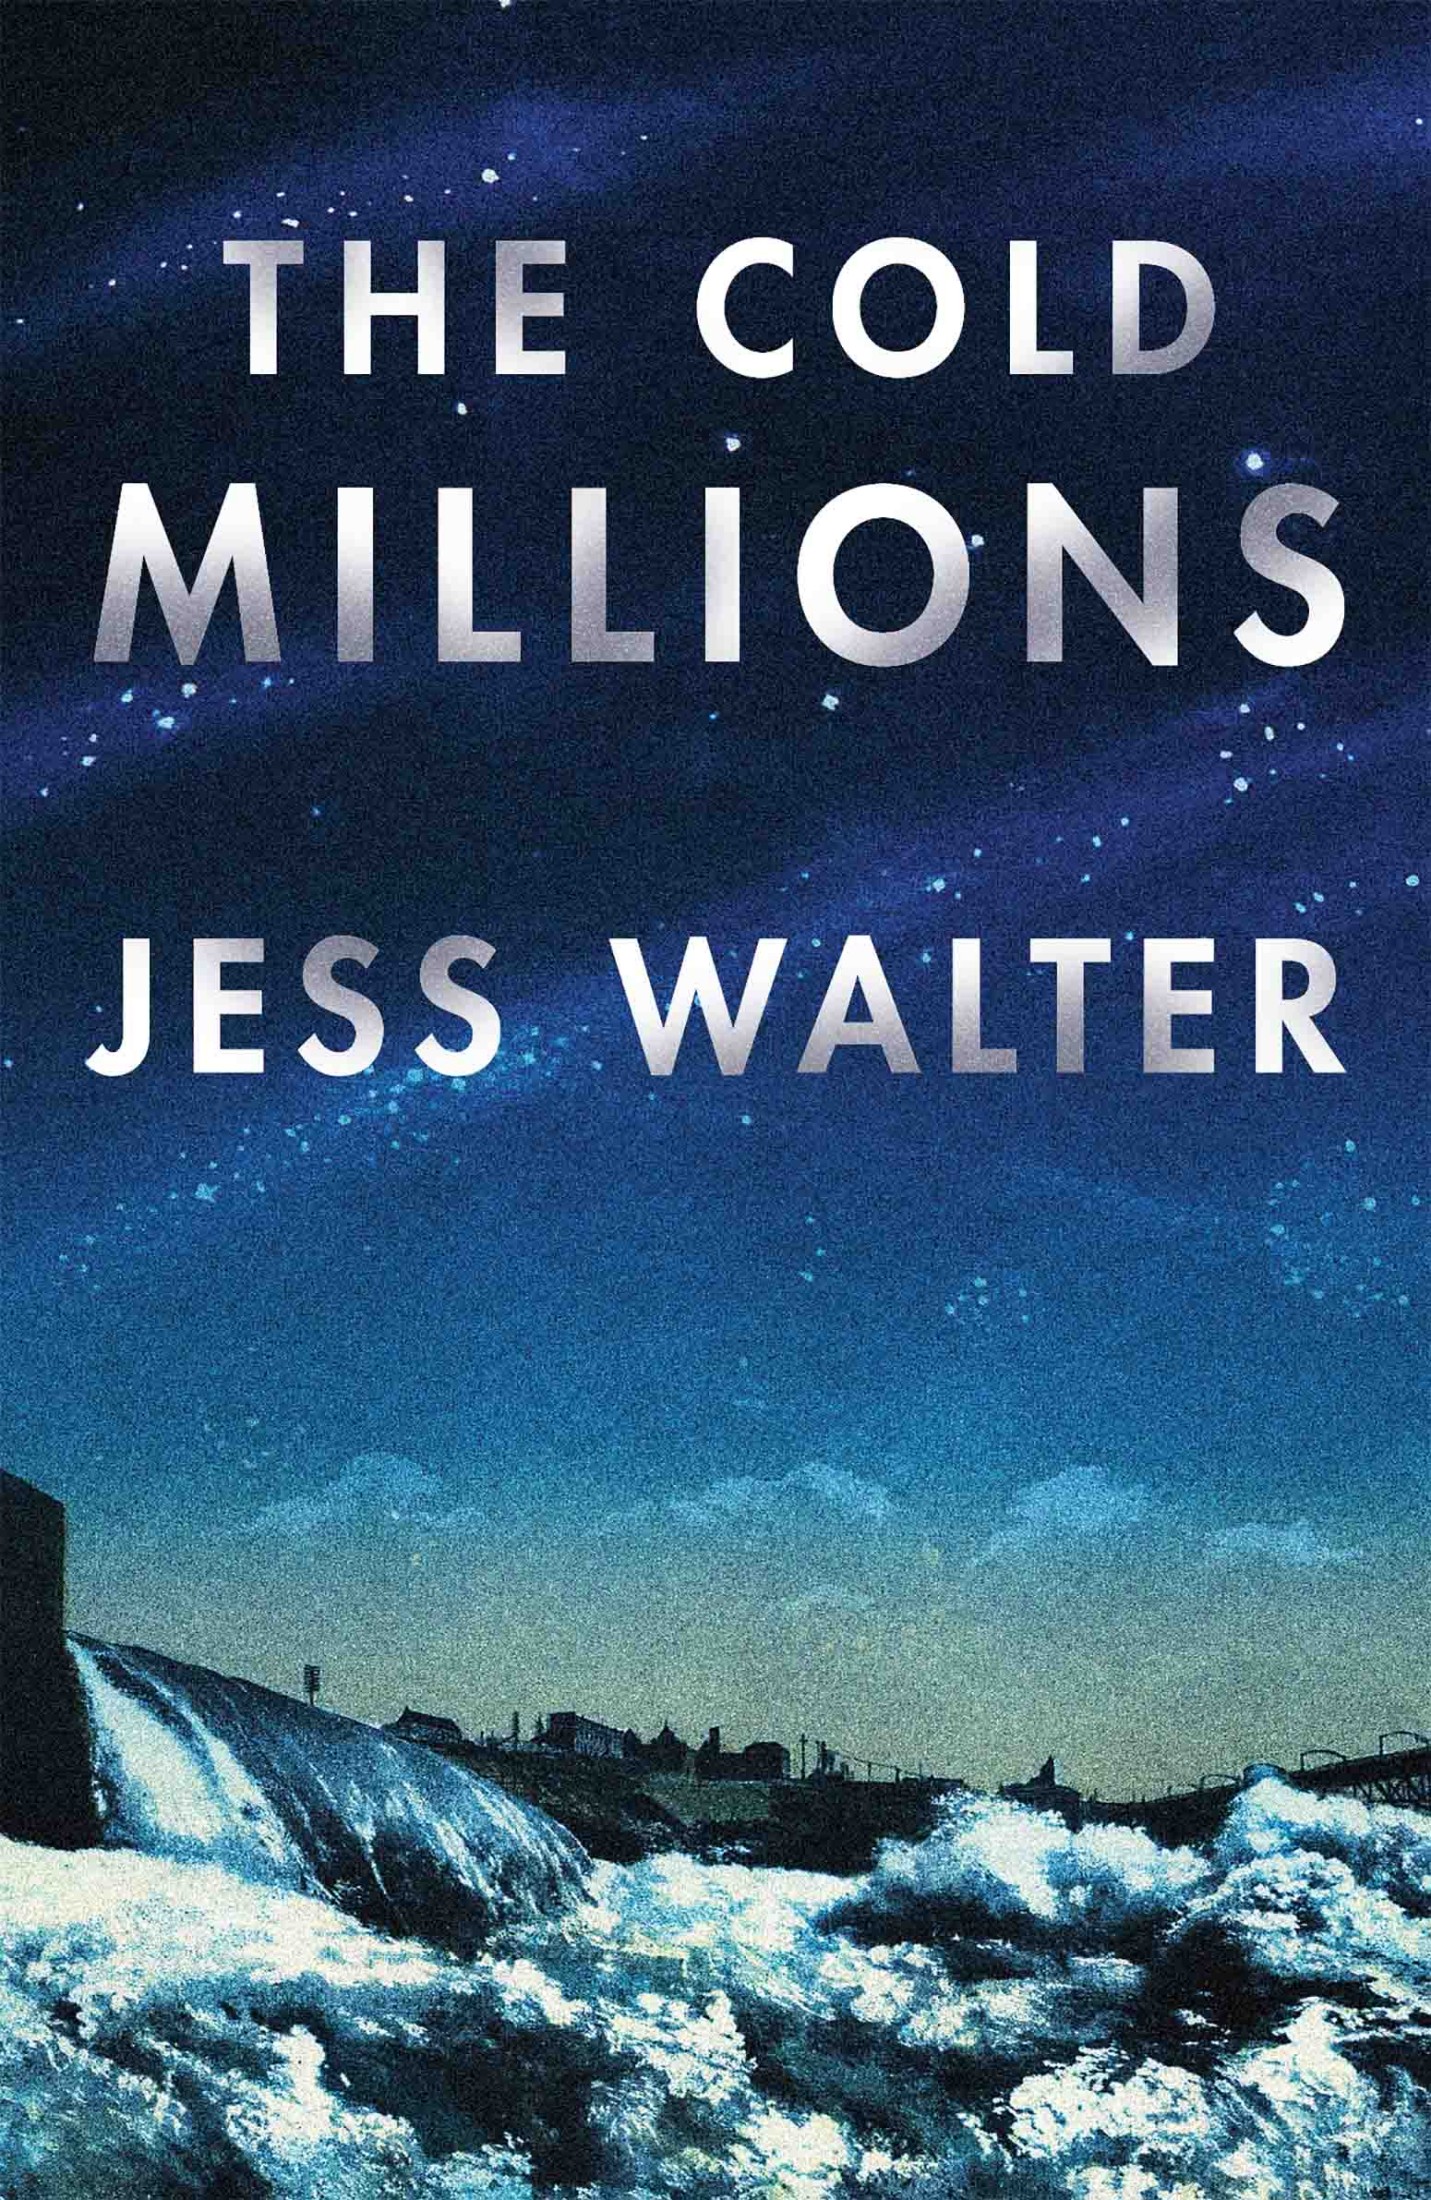 The Cold Millions: A Novel